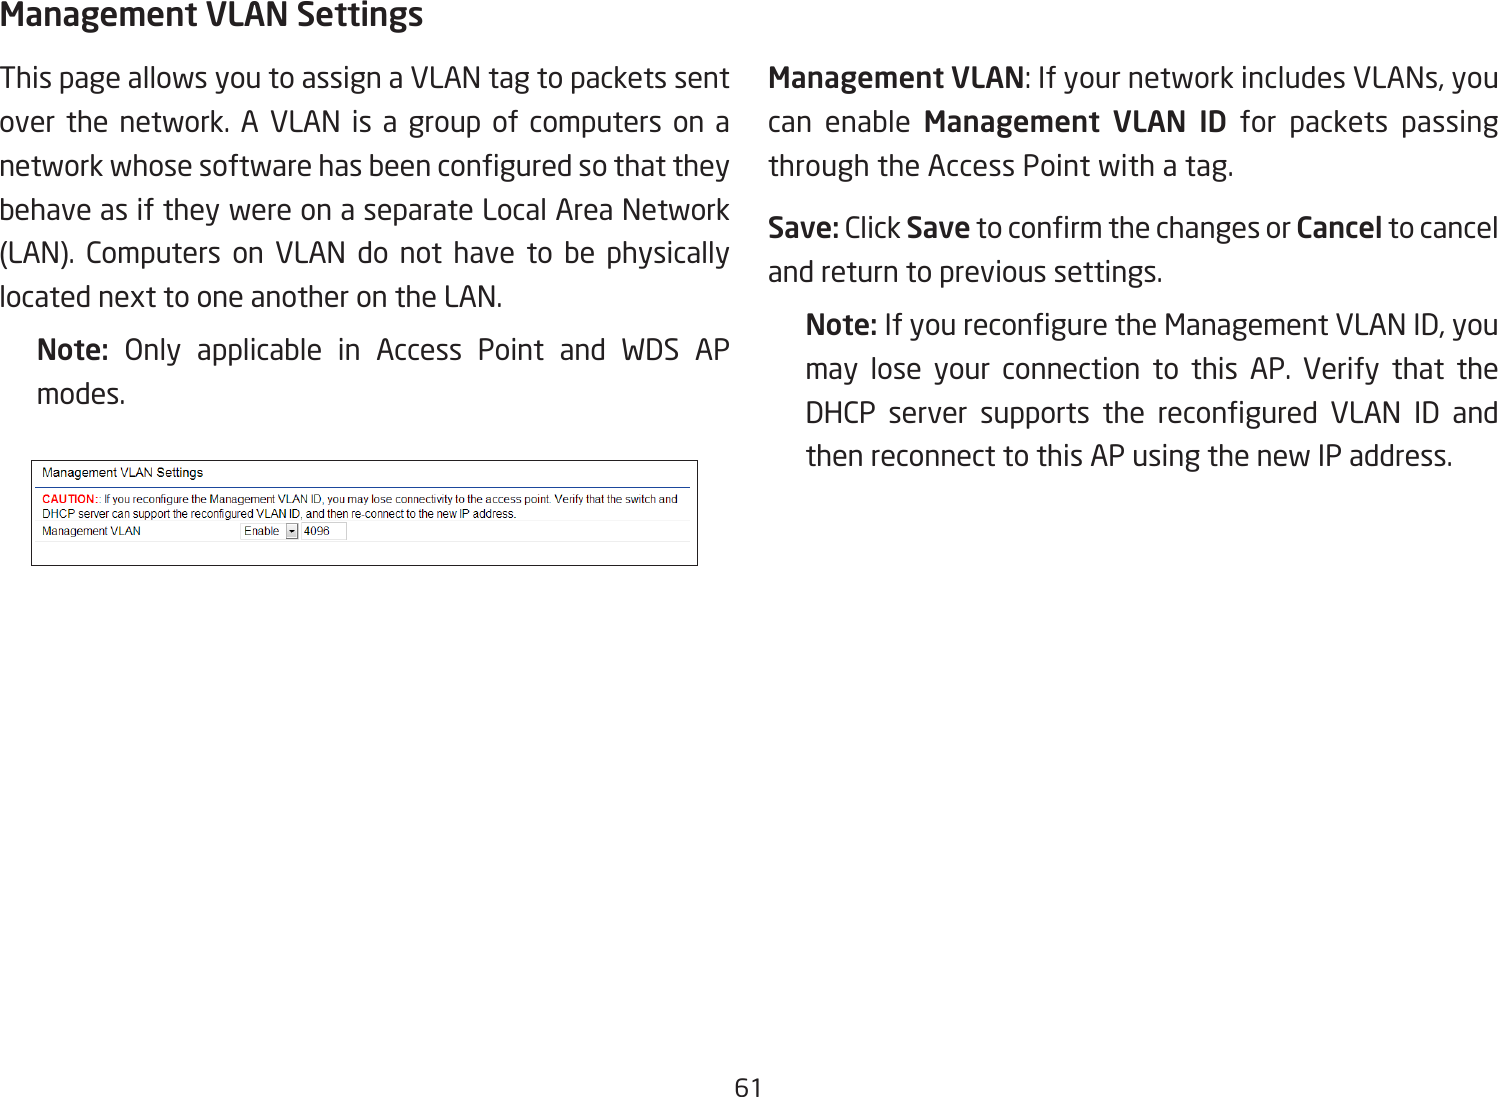 61Management VLAN SettingsThis page allows you to assign a VLAN tag to packets sent over the network. A VLAN is a group of computers on a network whose software has been congured so that they behave as if they were on a separate Local Area Network (LAN). Computers on VLAN do not have to be physically located next to one another on the LAN.Note:  Only applicable in Access Point and WDS AP modes.     Management VLAN: If your network includes VLANs, you can enable Management VLAN ID for packets passing through the Access Point with a tag. Save: Click Save to conrm the changes or Cancel to cancel and return to previous settings.Note: If you recongure the Management VLAN ID, you may lose your connection to this AP. Verify that the DHCP  server  supports  the  recongured  VLAN  ID  and then reconnect to this AP using the new IP address. 